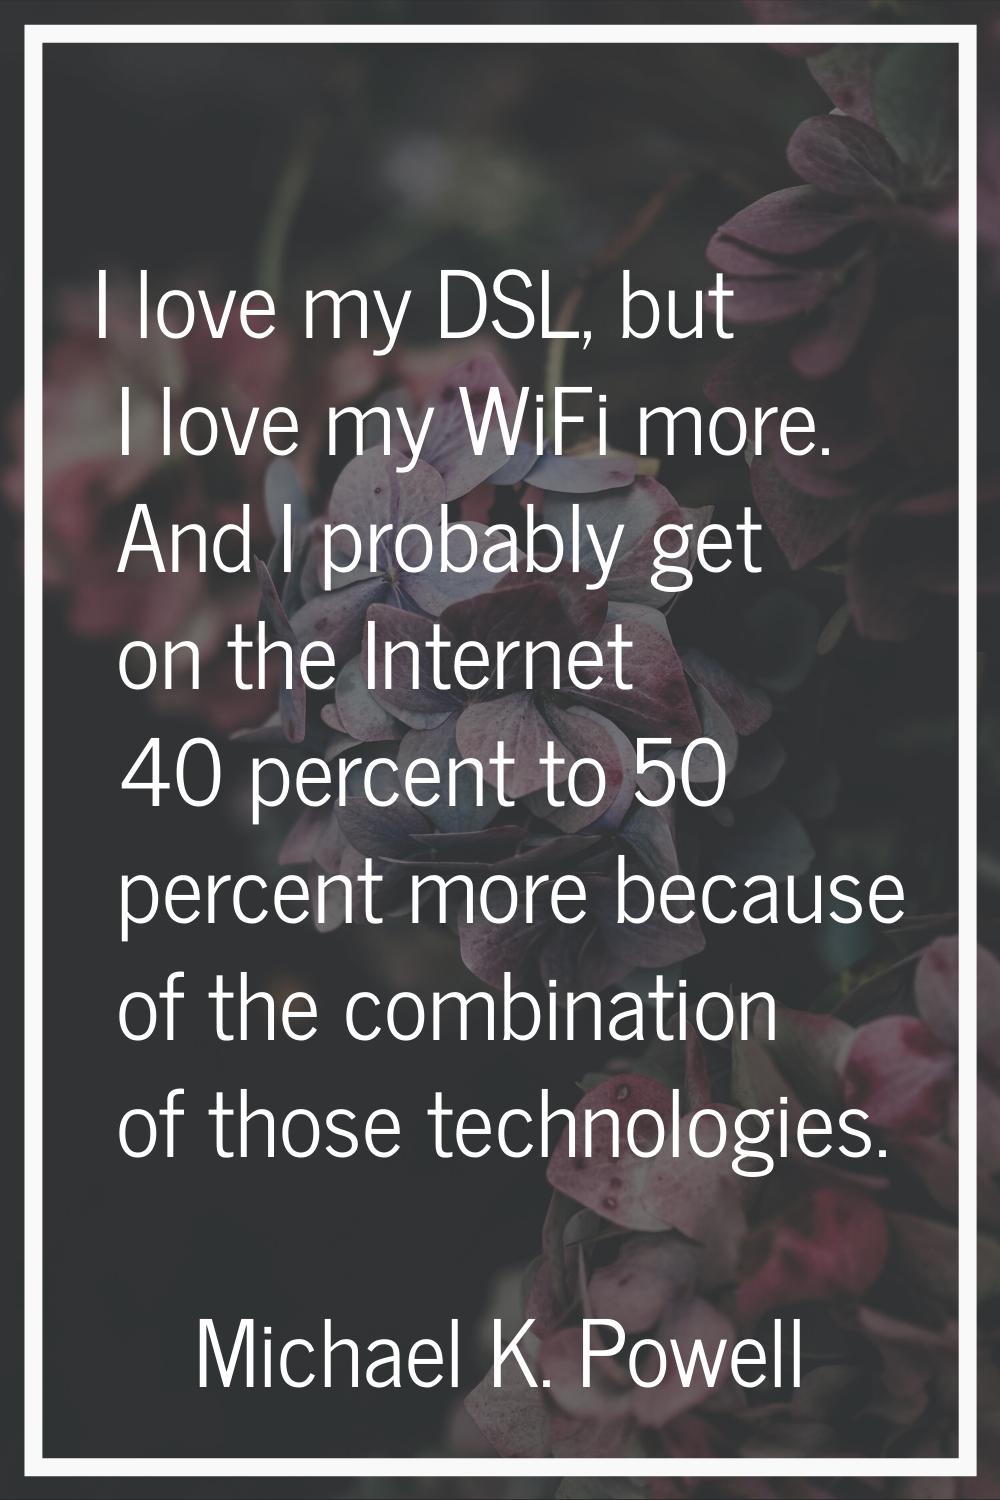 I love my DSL, but I love my WiFi more. And I probably get on the Internet 40 percent to 50 percent